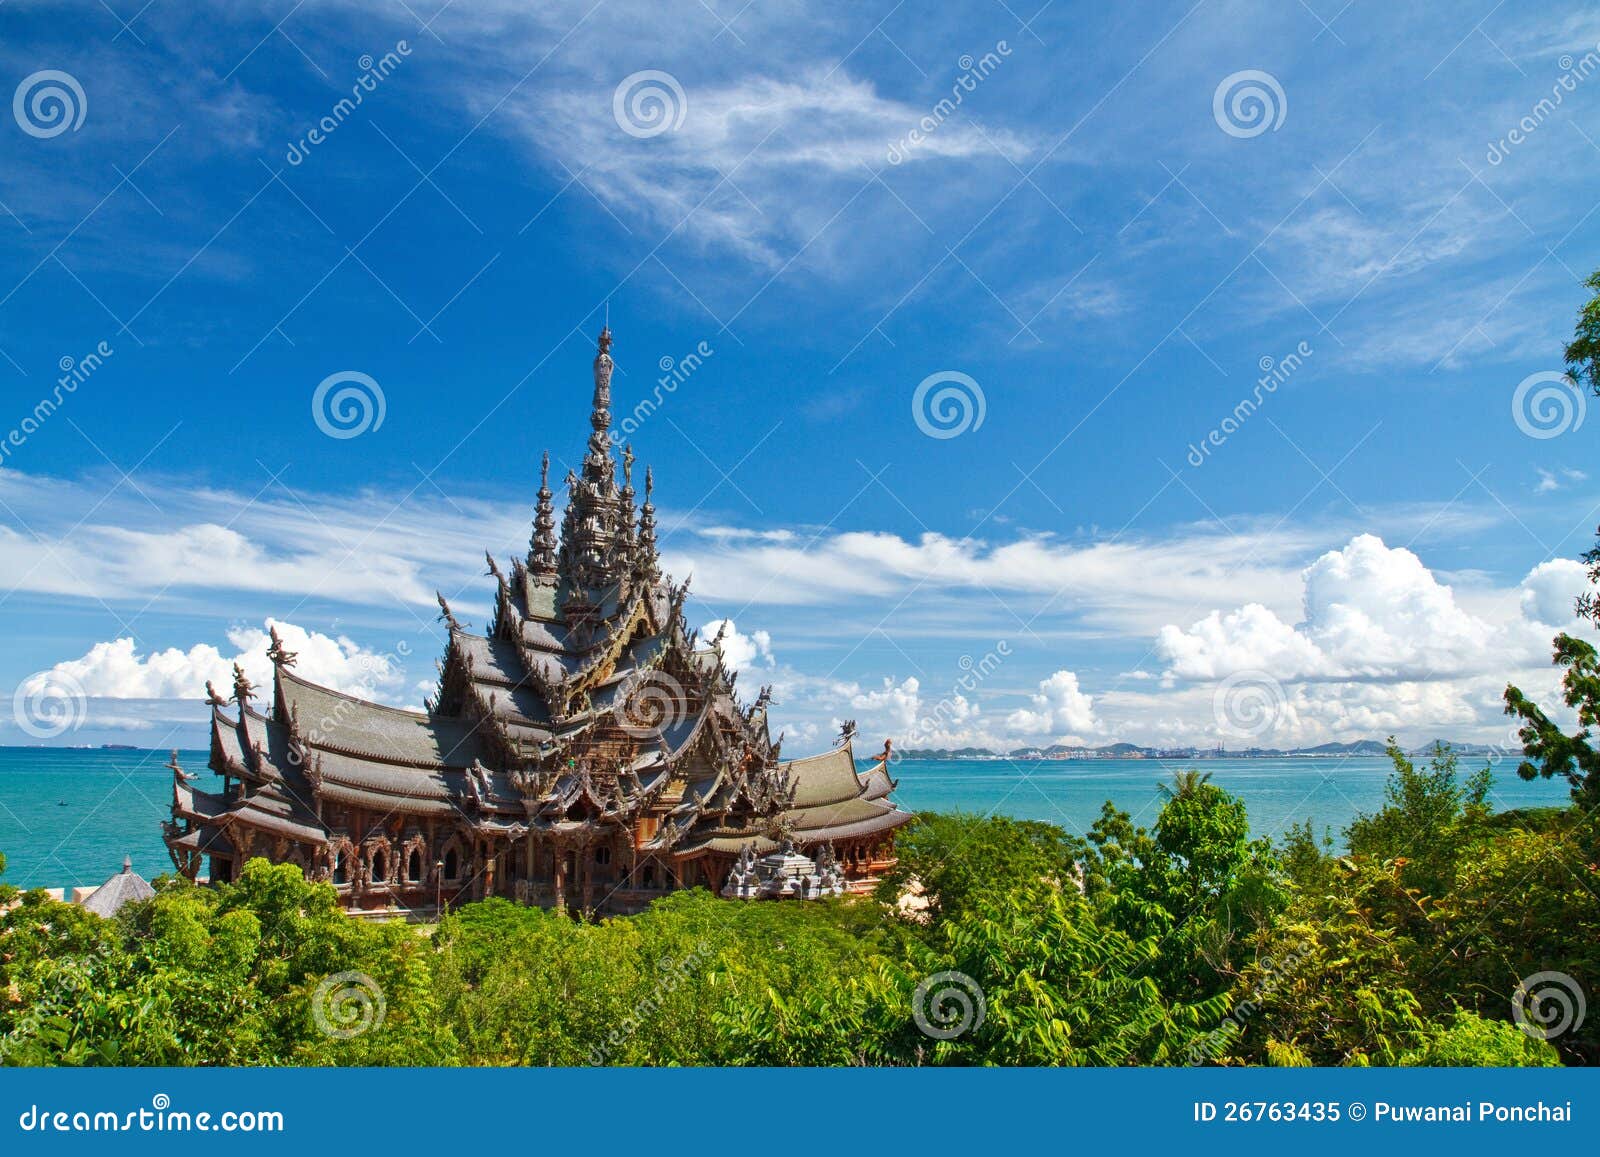 the wood sanctuary of truth in pattaya